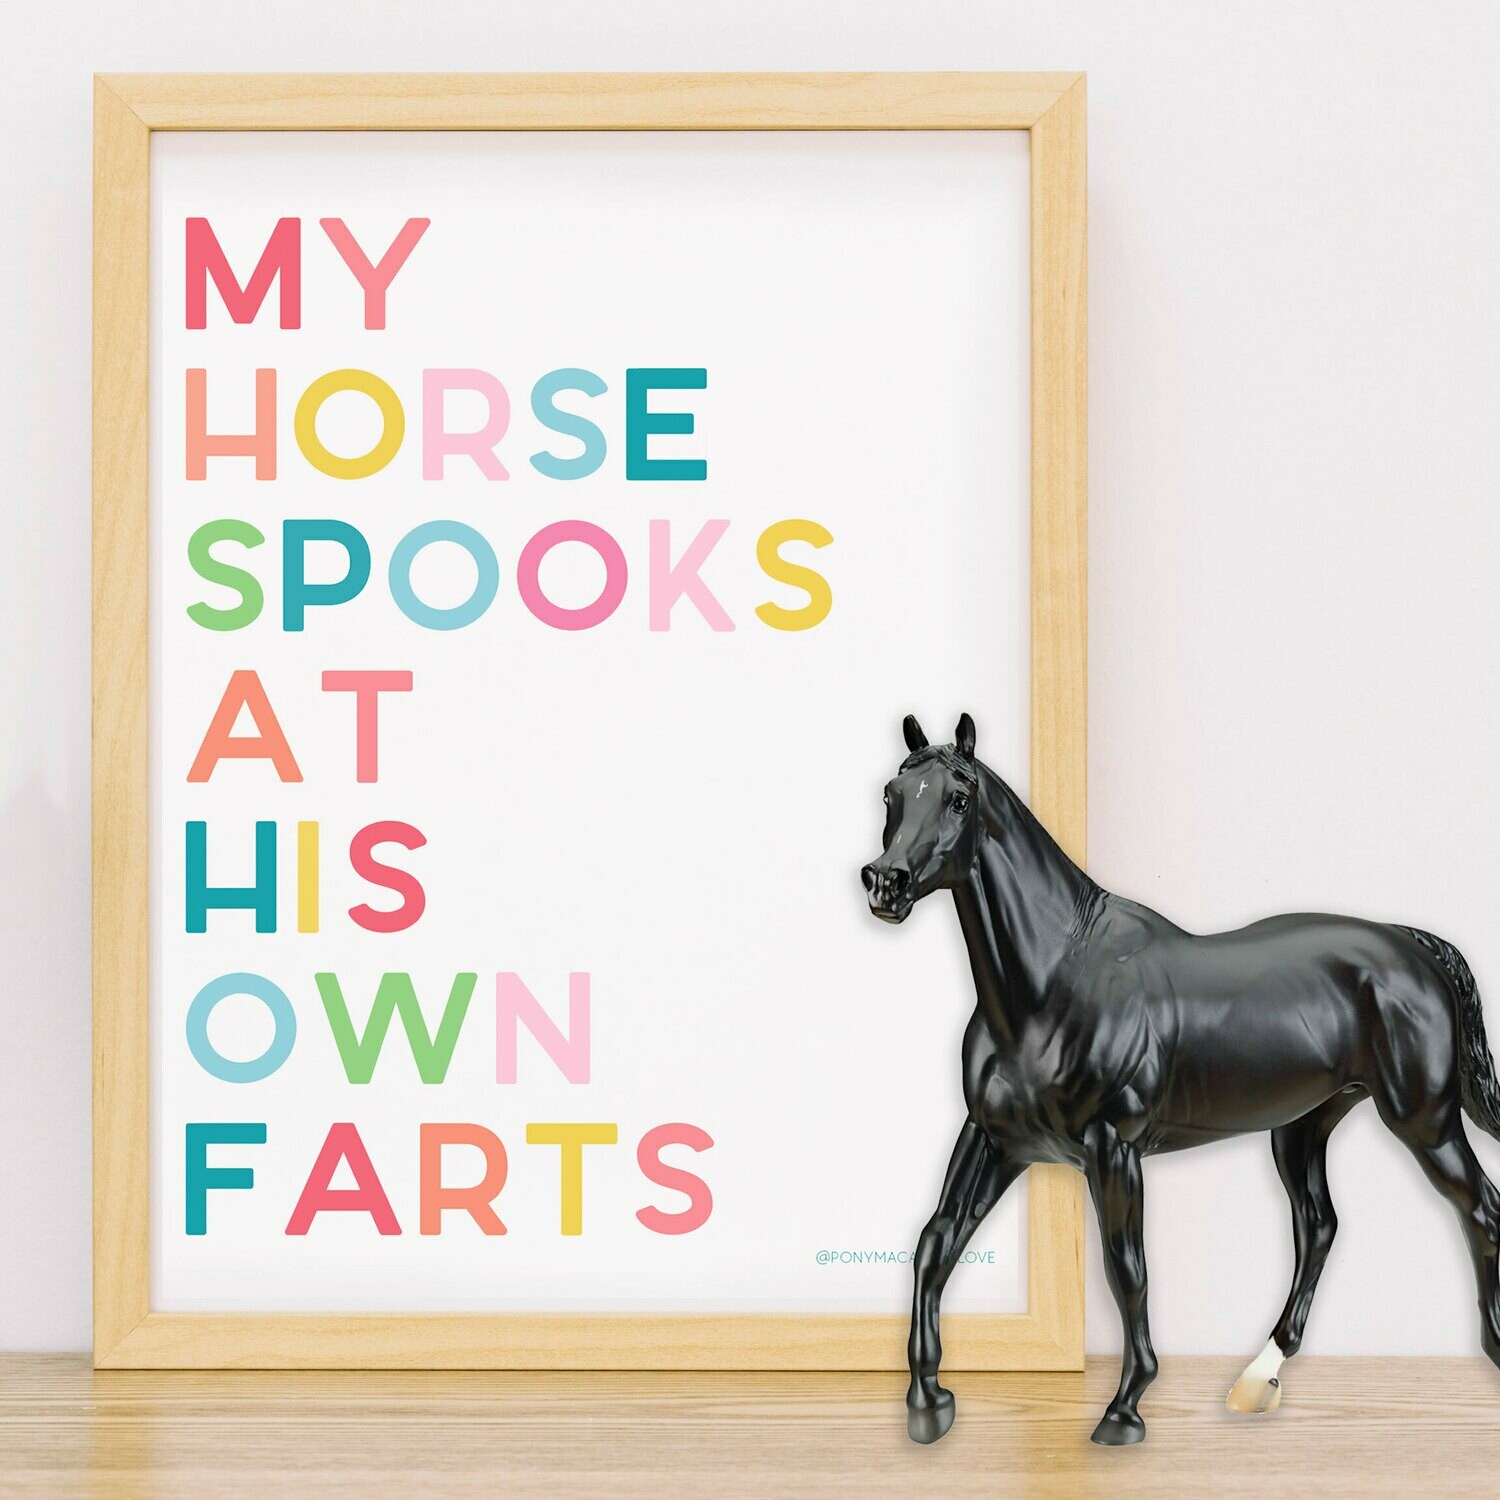 My Horse Spooks at his own Farts Digital Download 8x10 print